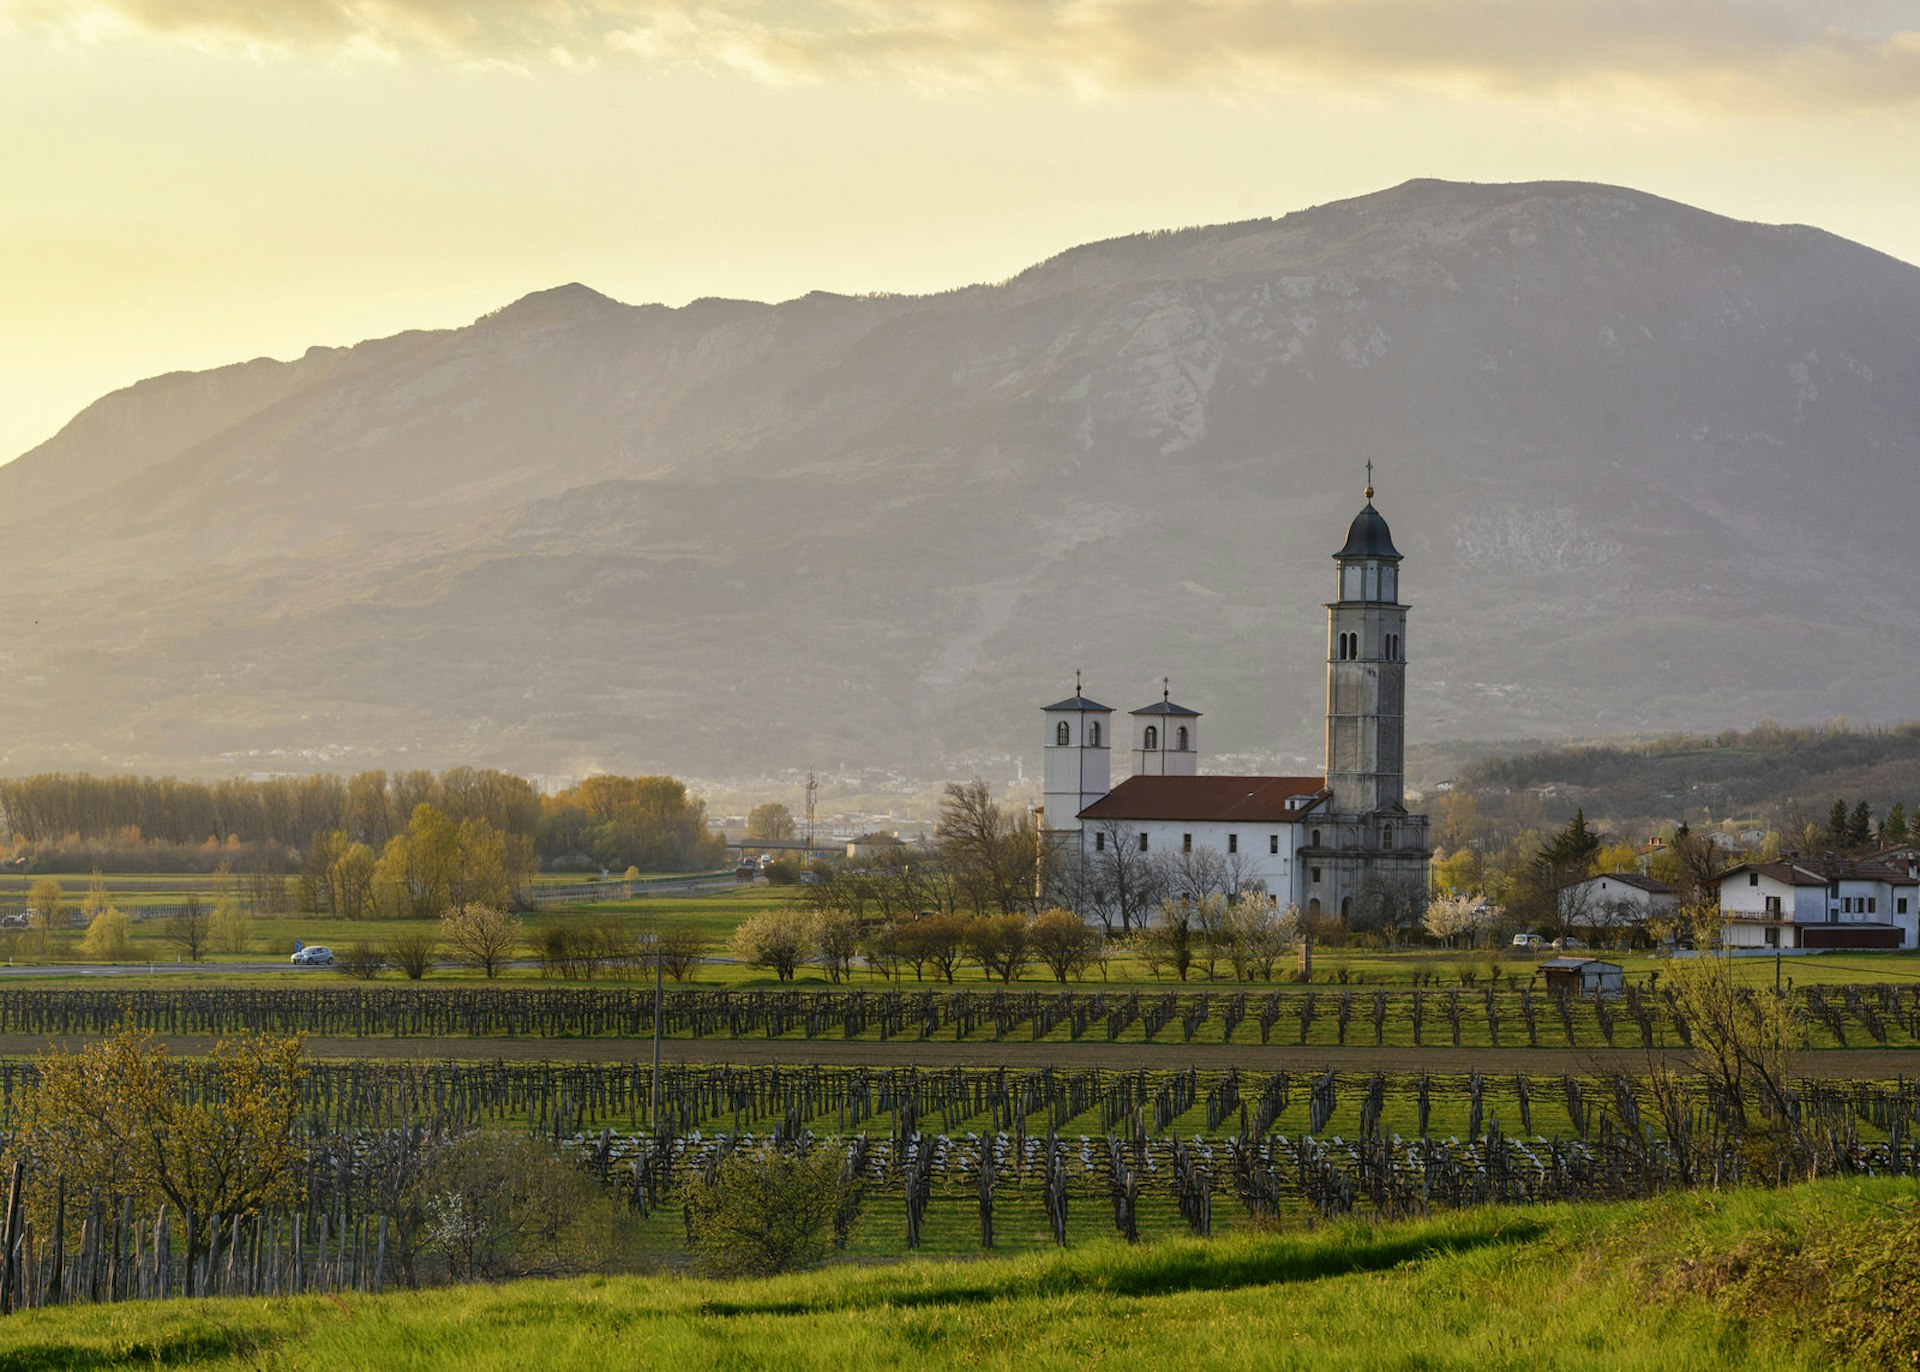 A church at dusk in Slovenia's Vipava Valley © Mny-Jhee / Getty Images